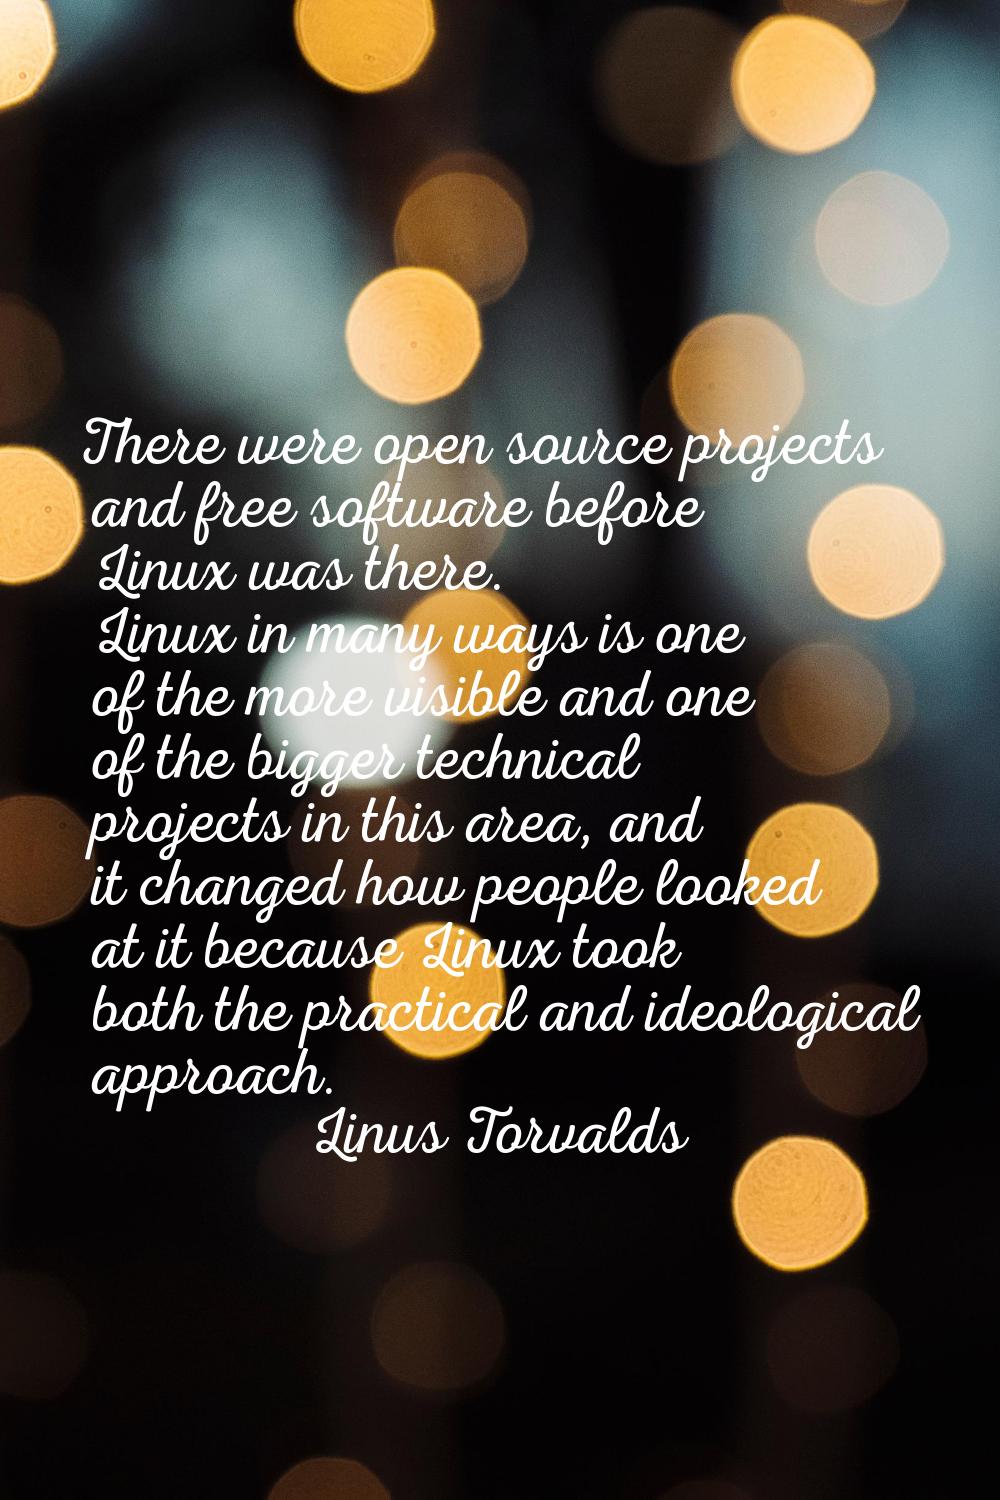 There were open source projects and free software before Linux was there. Linux in many ways is one